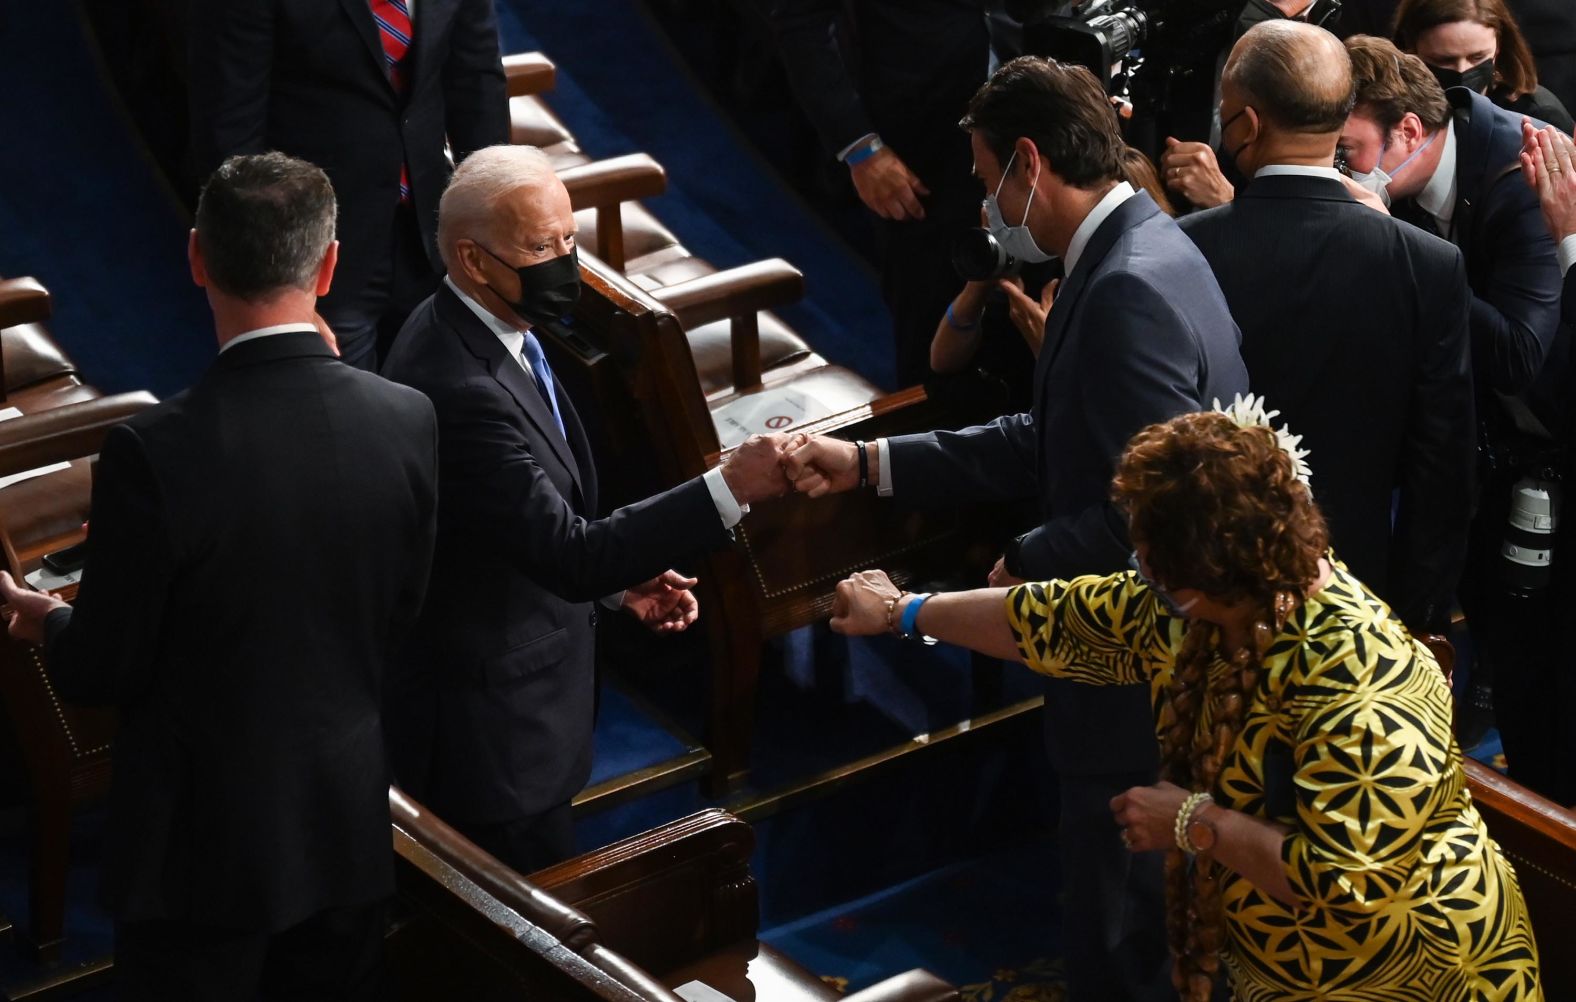 Biden greets people as he arrives in the House chamber.